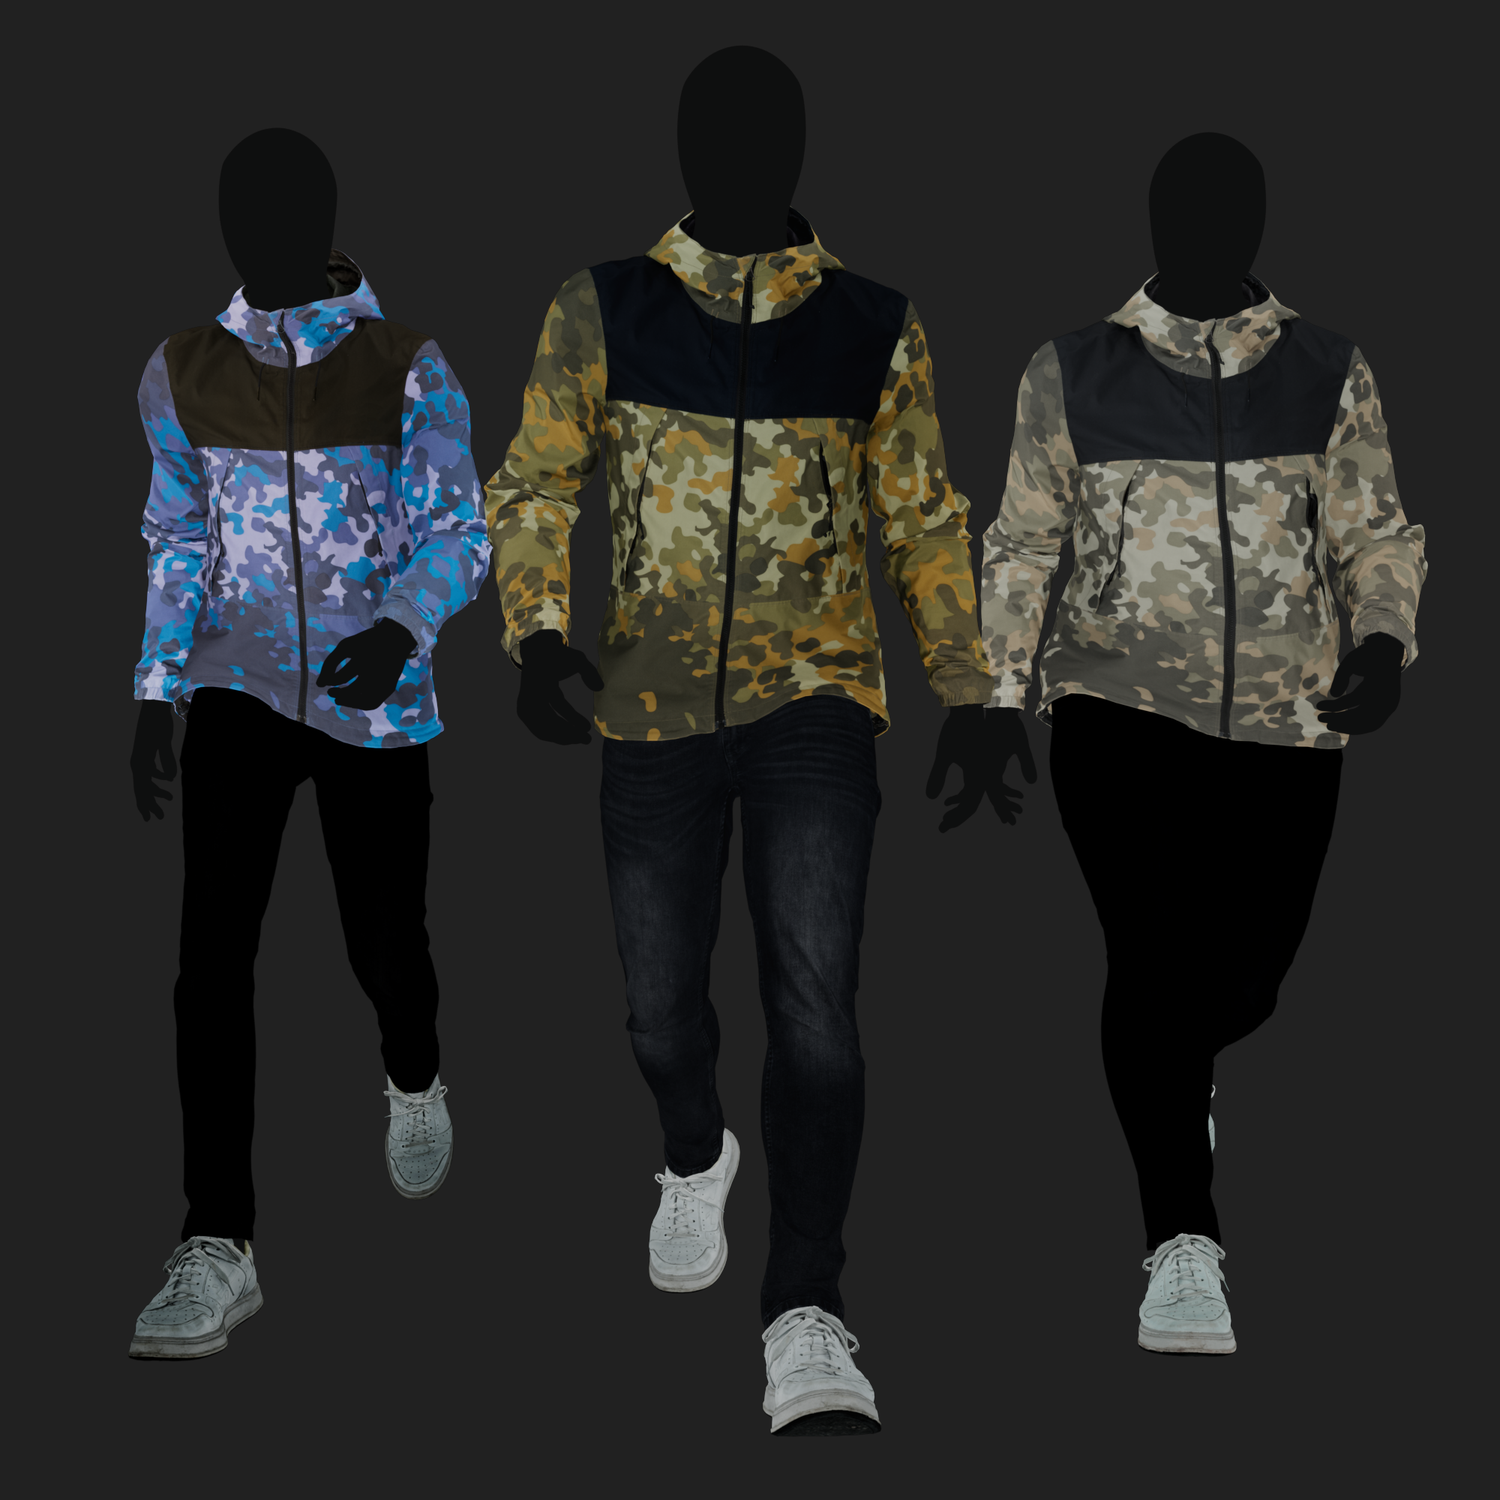 Albedo (Diffuse) map rendering of a 3D model of an animated walking male character dressed in a Camouflage Jacket and Jeans - front view